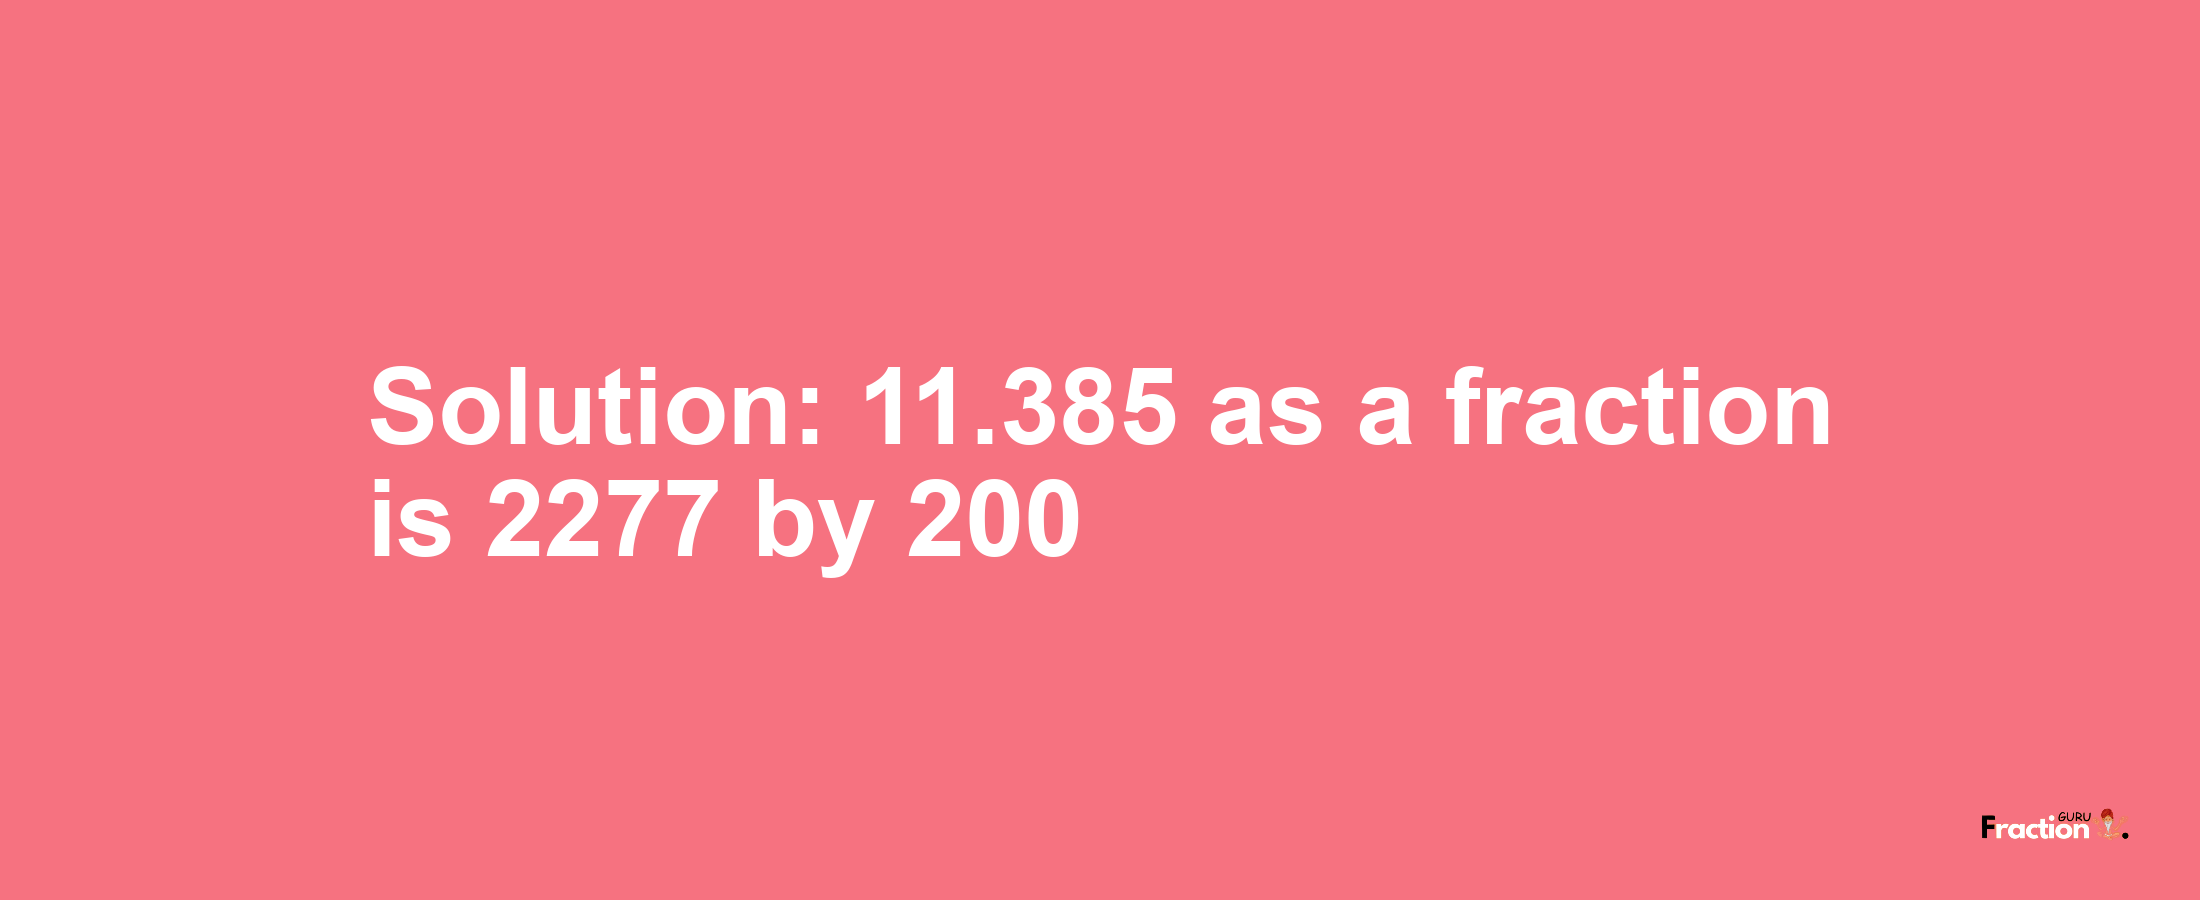 Solution:11.385 as a fraction is 2277/200